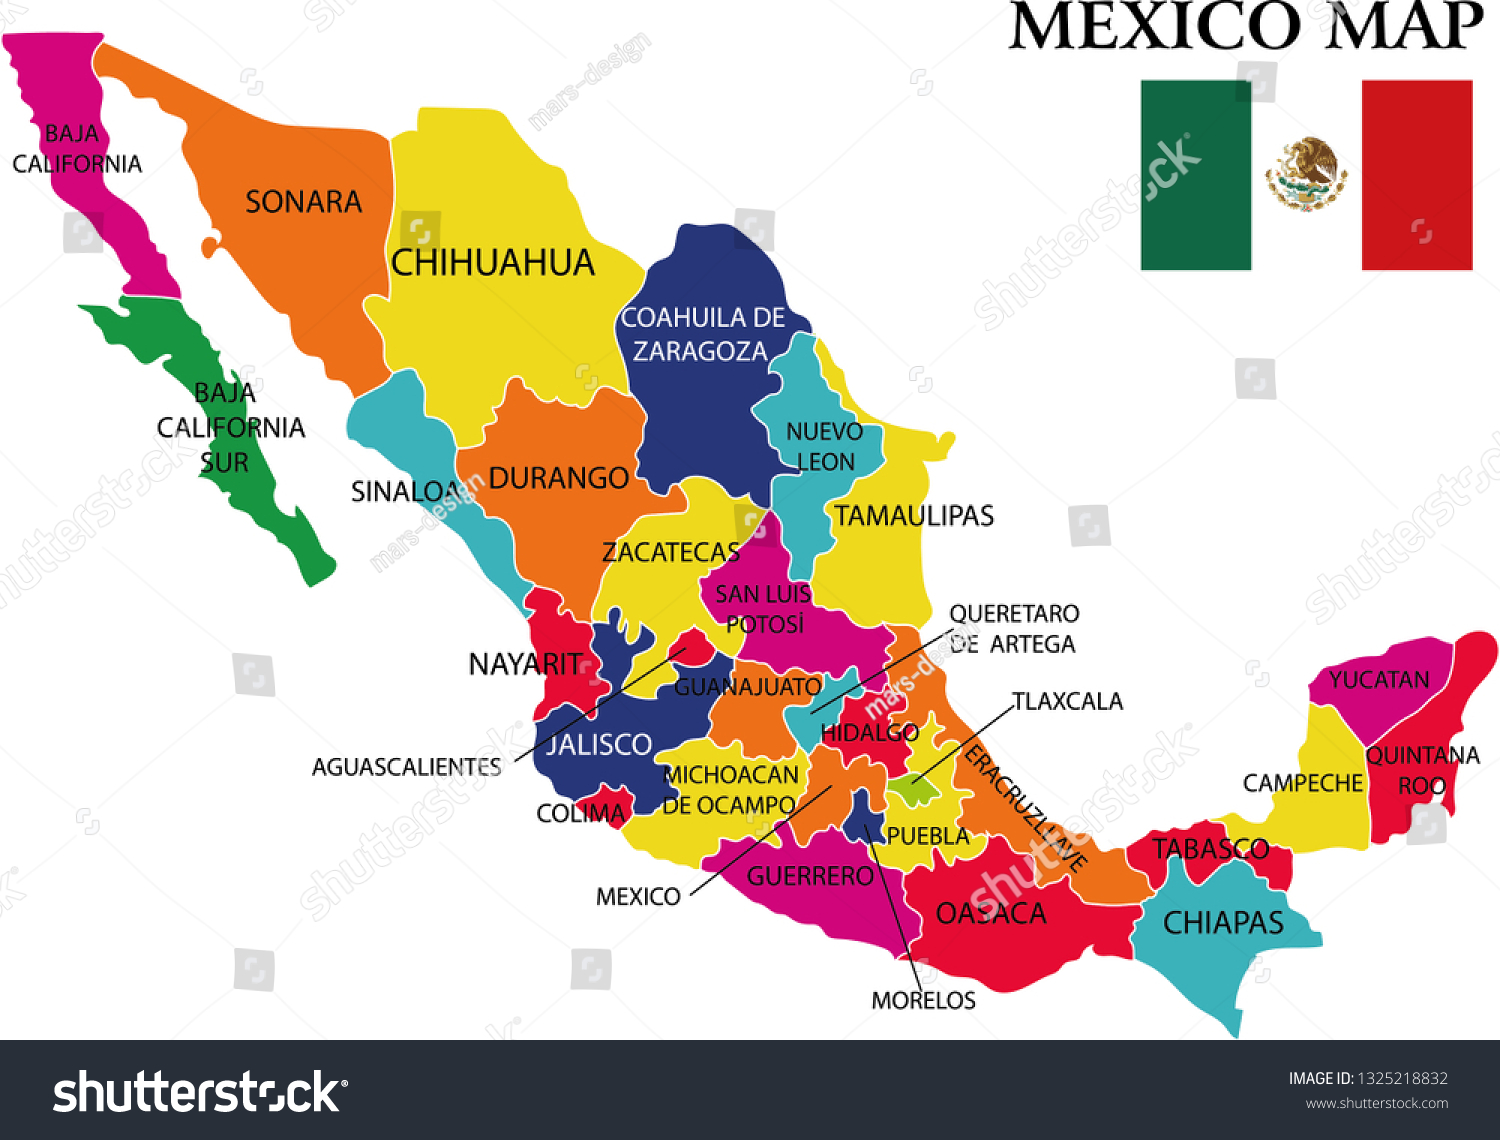 Mexico Map - Simple Vector Map Of The State Mexico Royalty Free ...